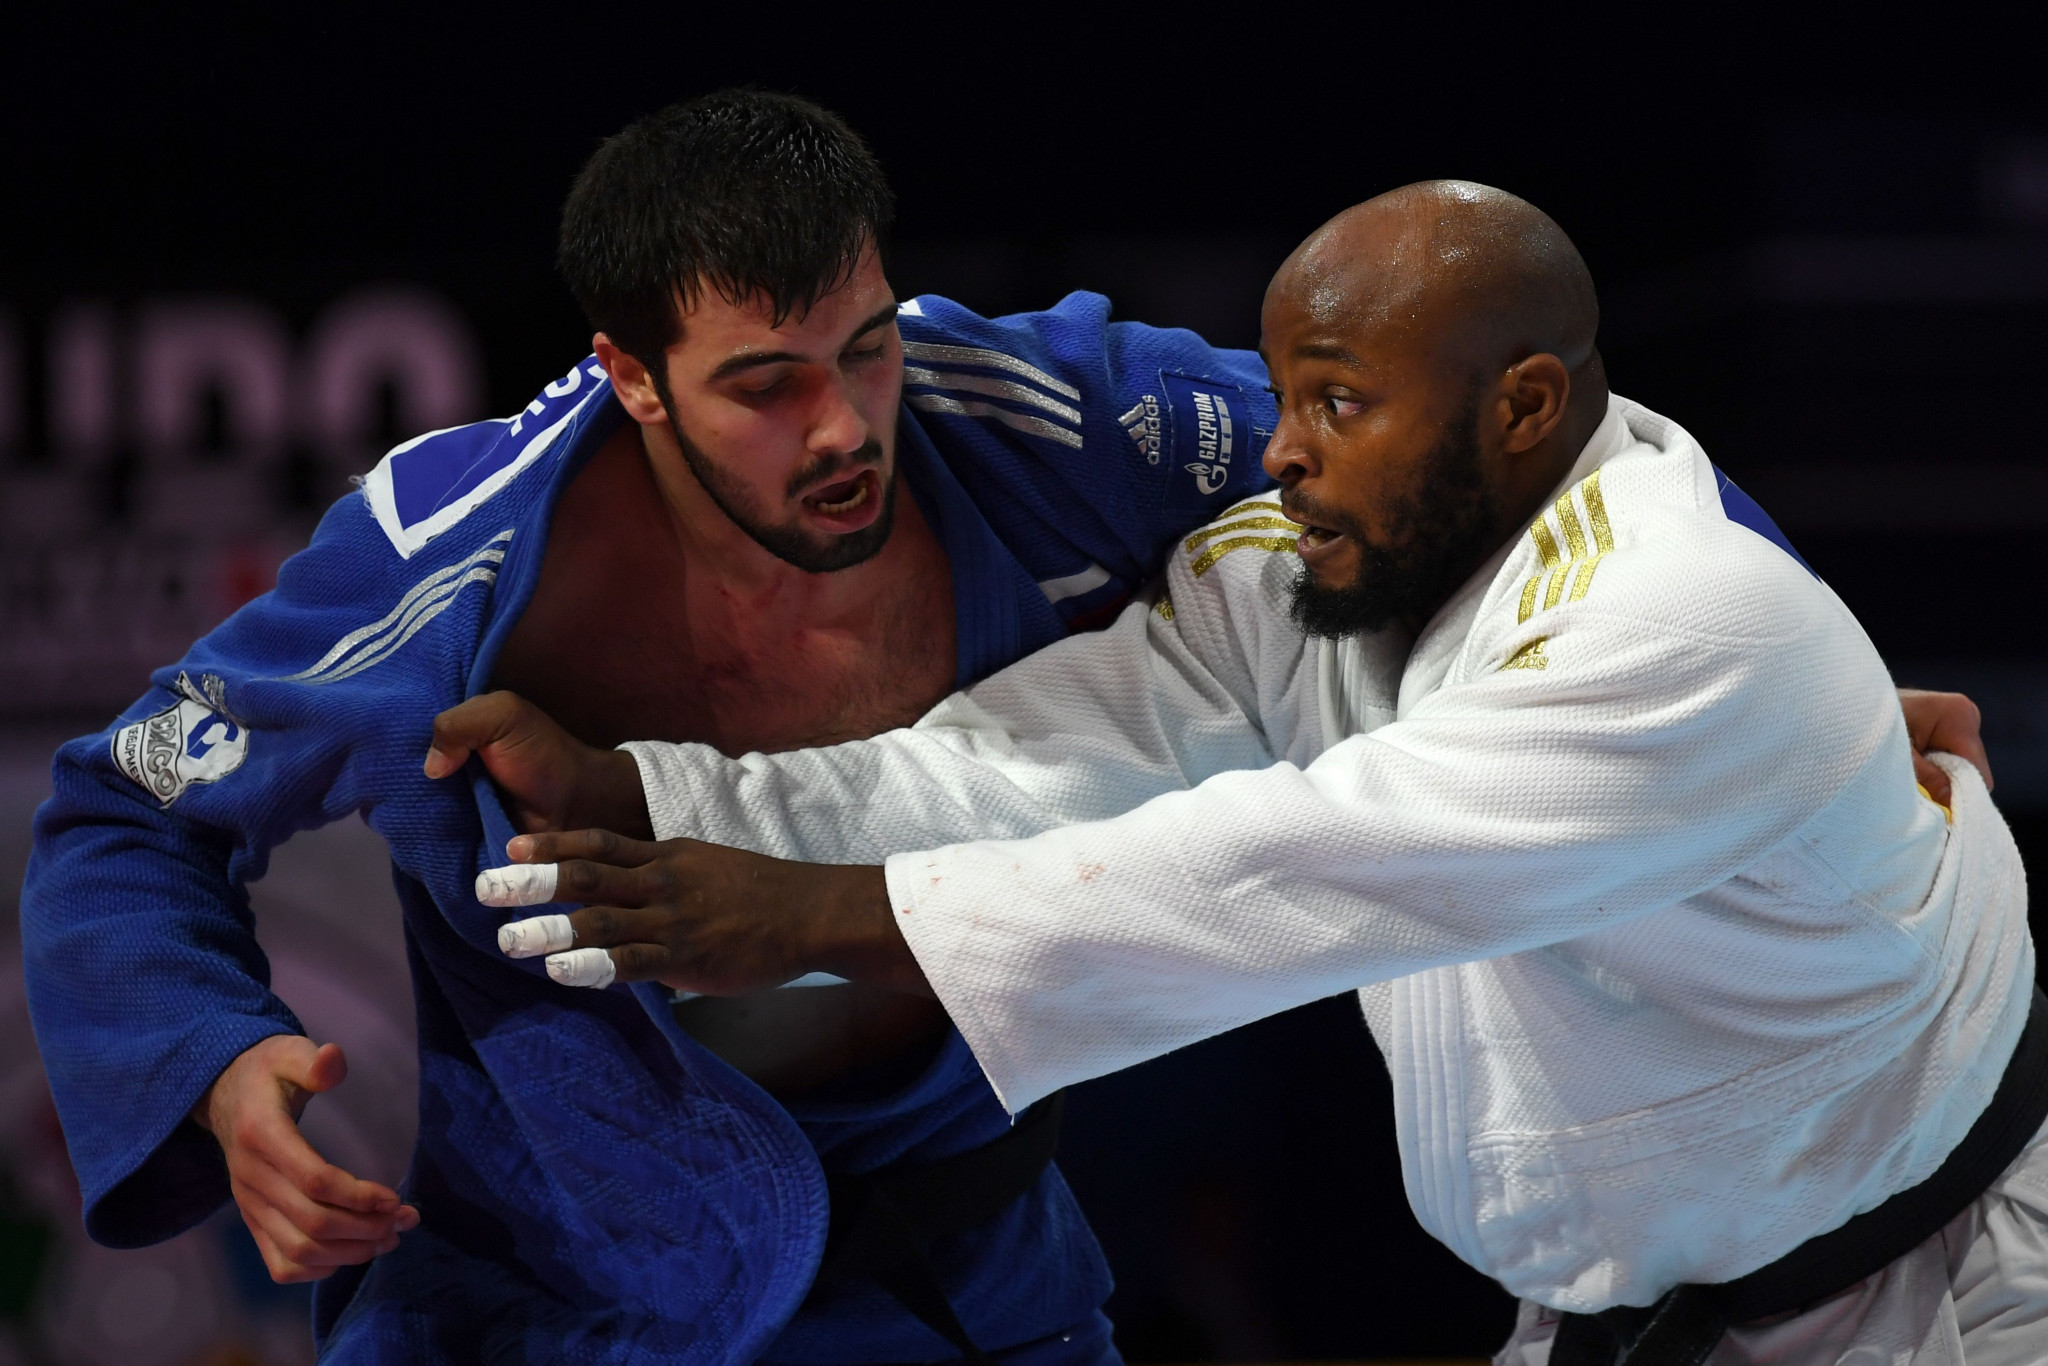 Jorge Fonseca, right, will be the favourite in the men's 100kg as the reigning world champion ©Getty Images